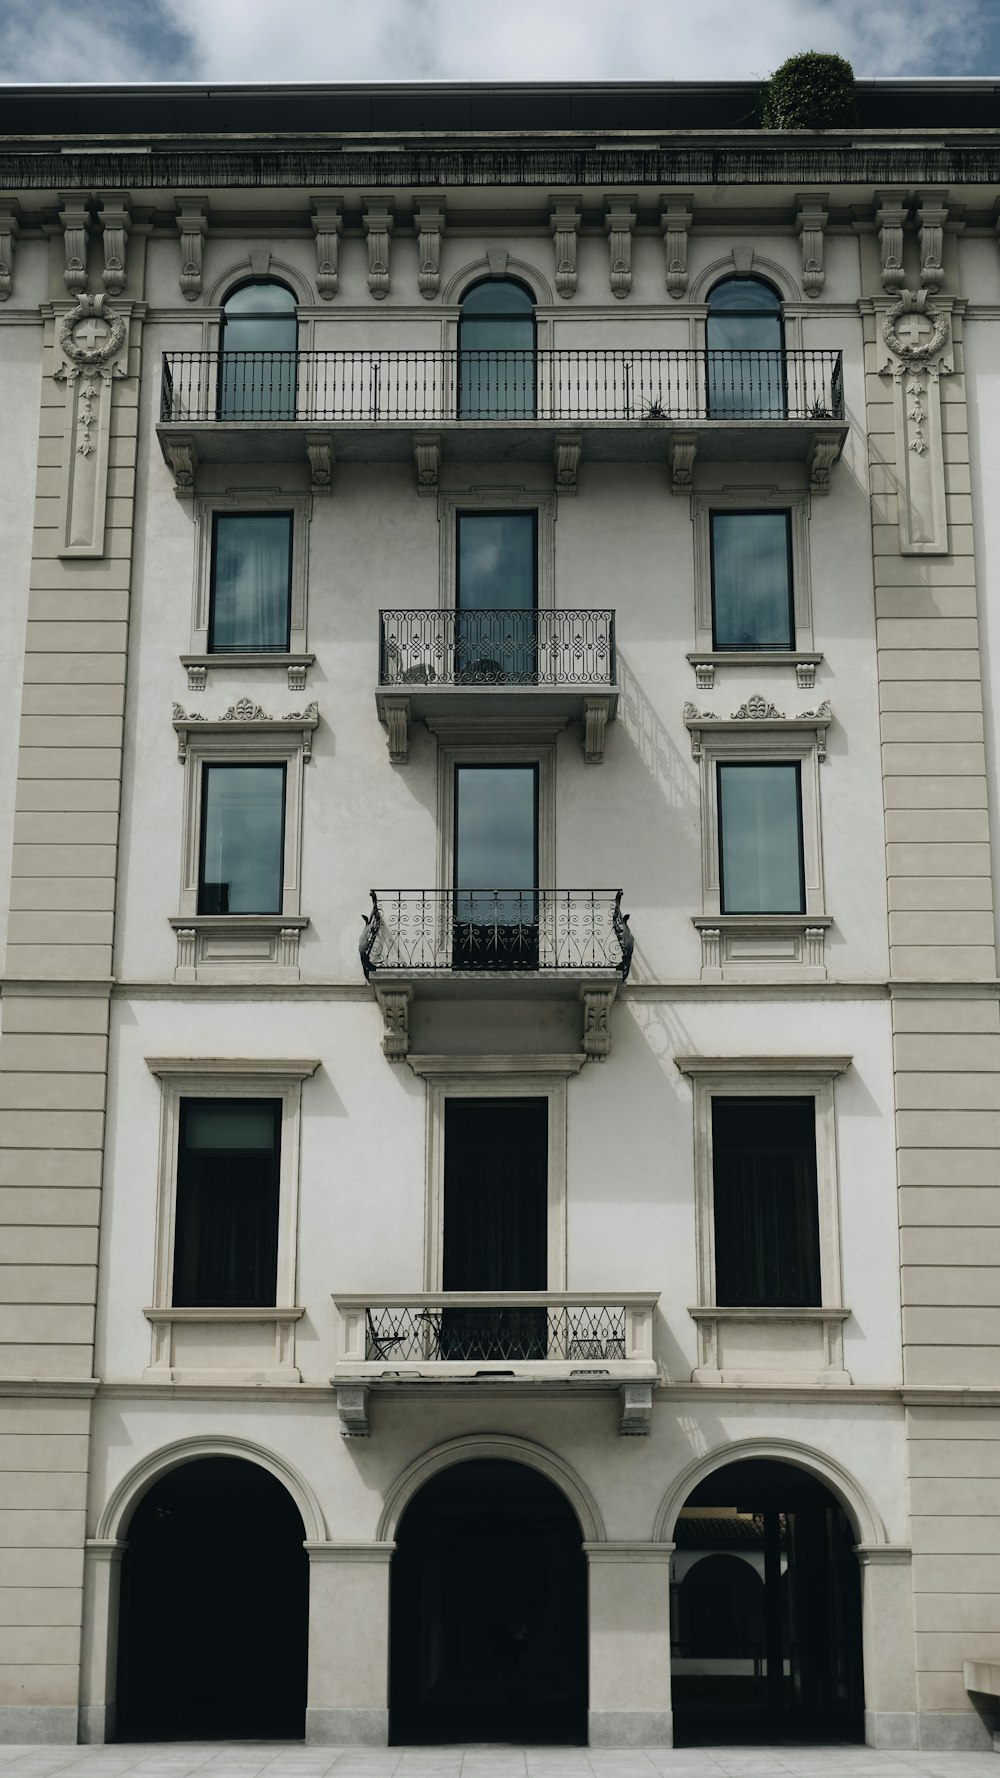 a large white building with many windows and balconies